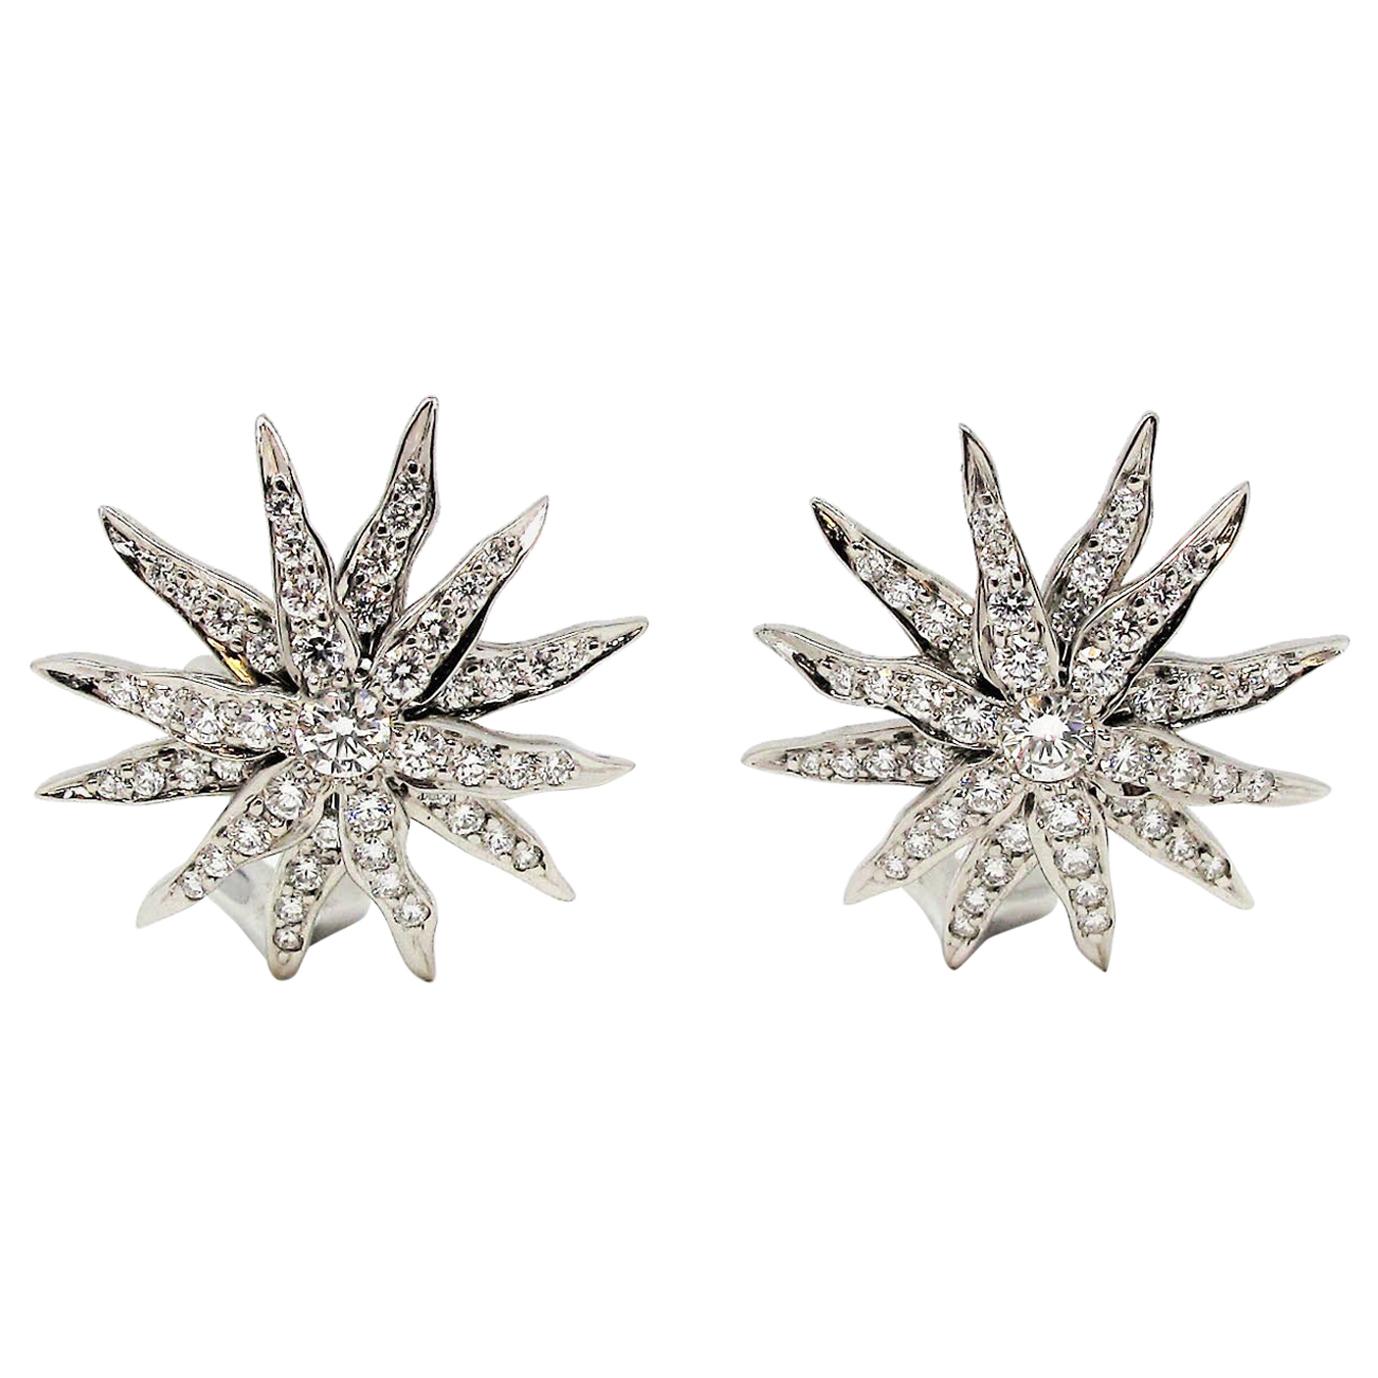 Tiffany & Co. Lace Collection Sunburst Pave Diamond Earrings in Platinum G / VS